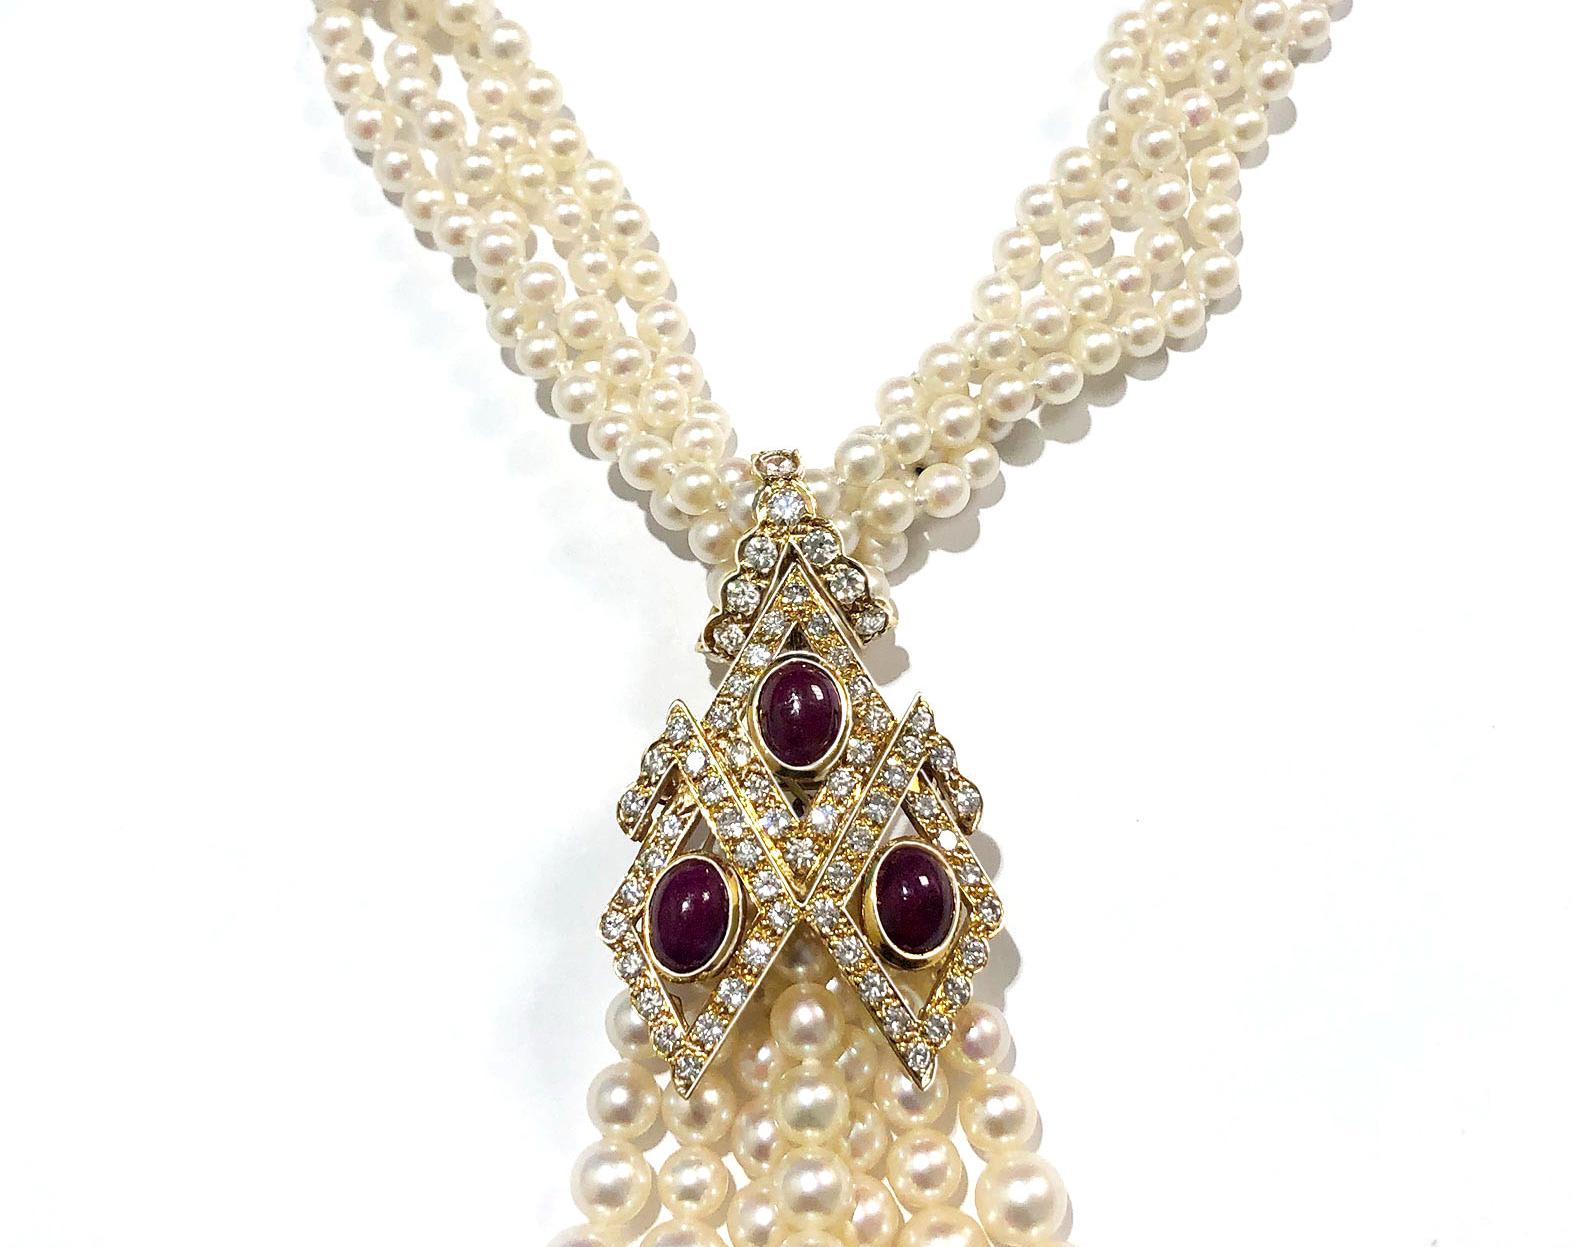 Four Strand Cultured Pearl, Gold, Cabochon Ruby and Diamond Fringe Necklace In Good Condition For Sale In Philadelphia, PA